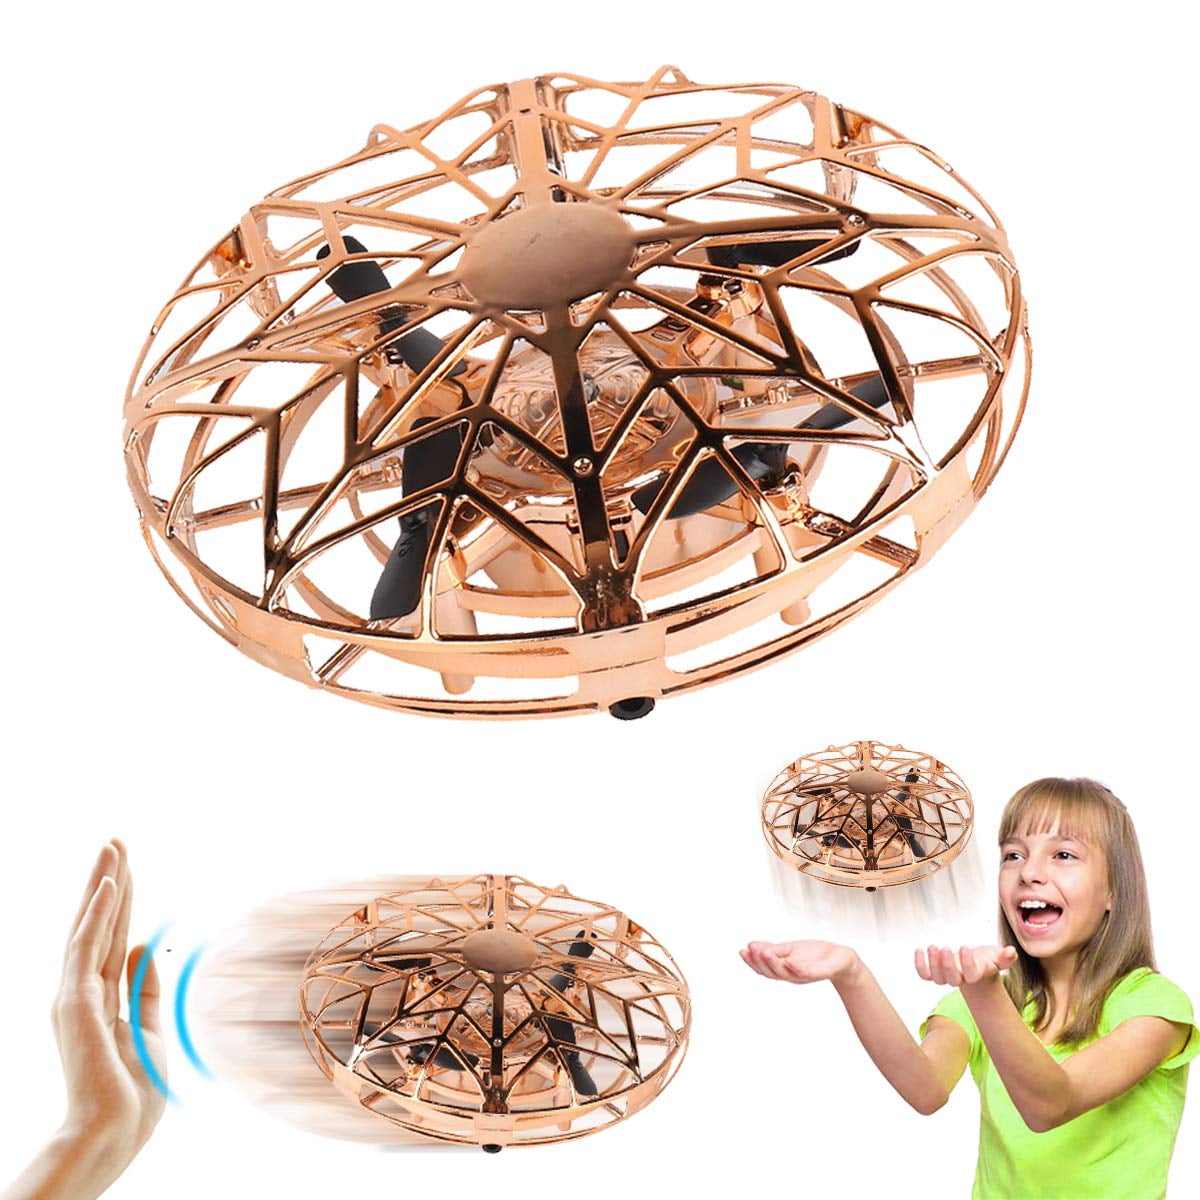 Byserten Toys for 4 5 6 Year Old Boys Mini Indoor Drone Air Magic Hogs Flying Toys Remote Control Helicopter UFO Hand Operated Drones for Kids with LED Lights Gifts Birthday Christmas 